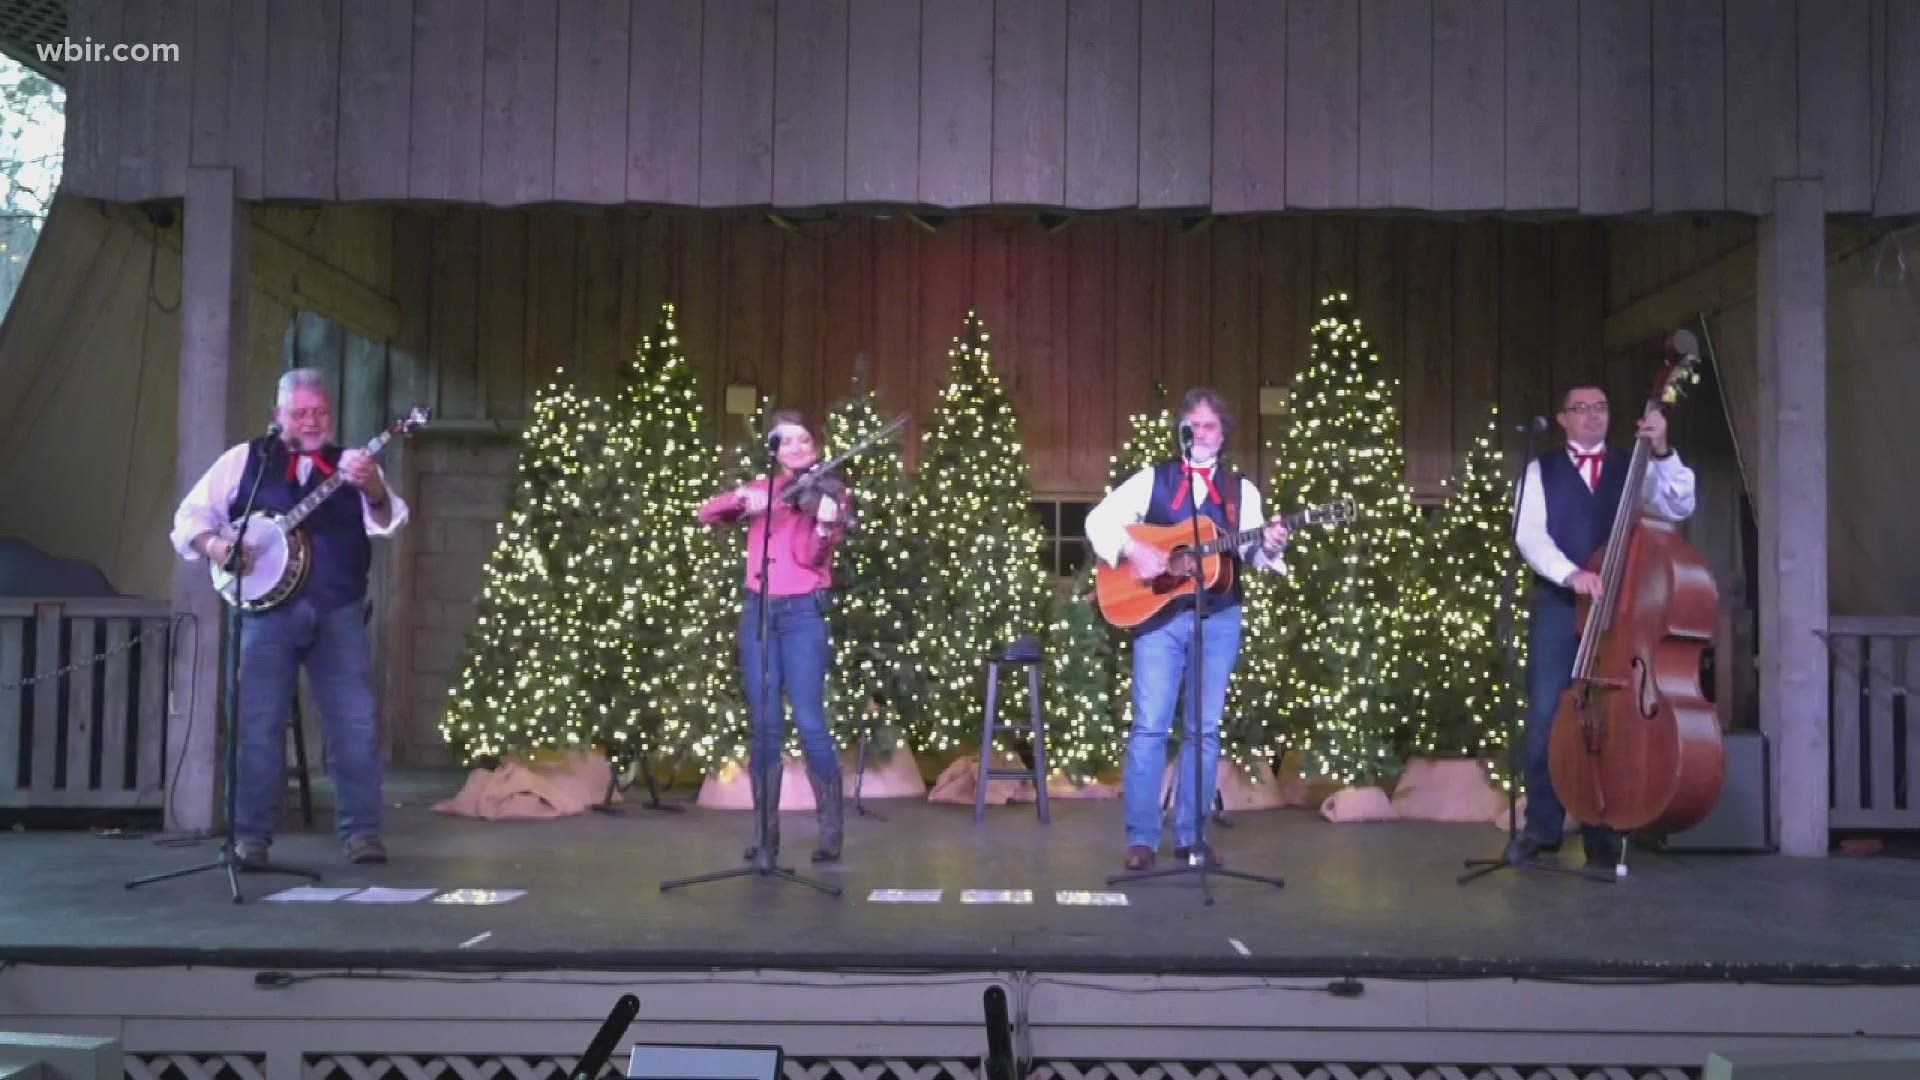 The Smoky Mountain String Band from Dollywood performs "Christmas Country Style."